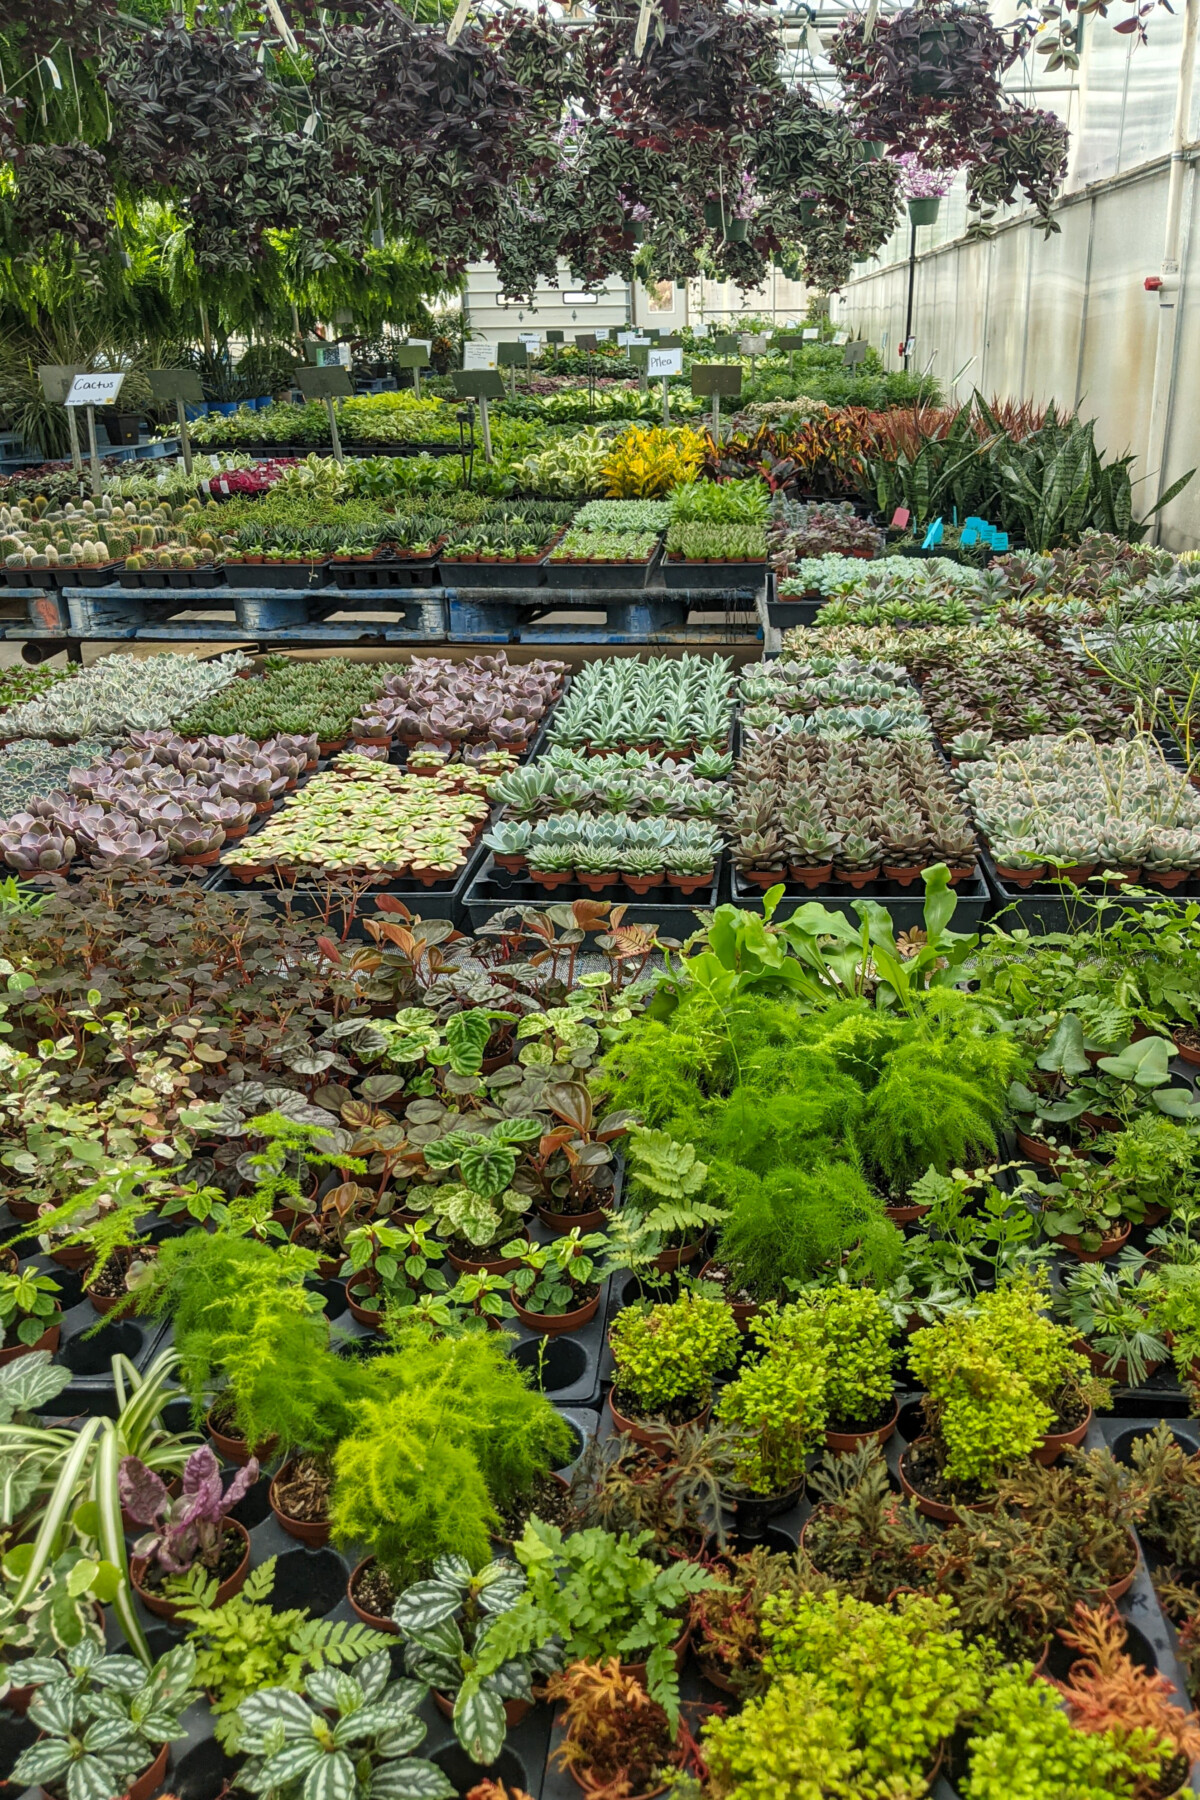 View of a well-stocked commercial greenhouse filled with houseplants.